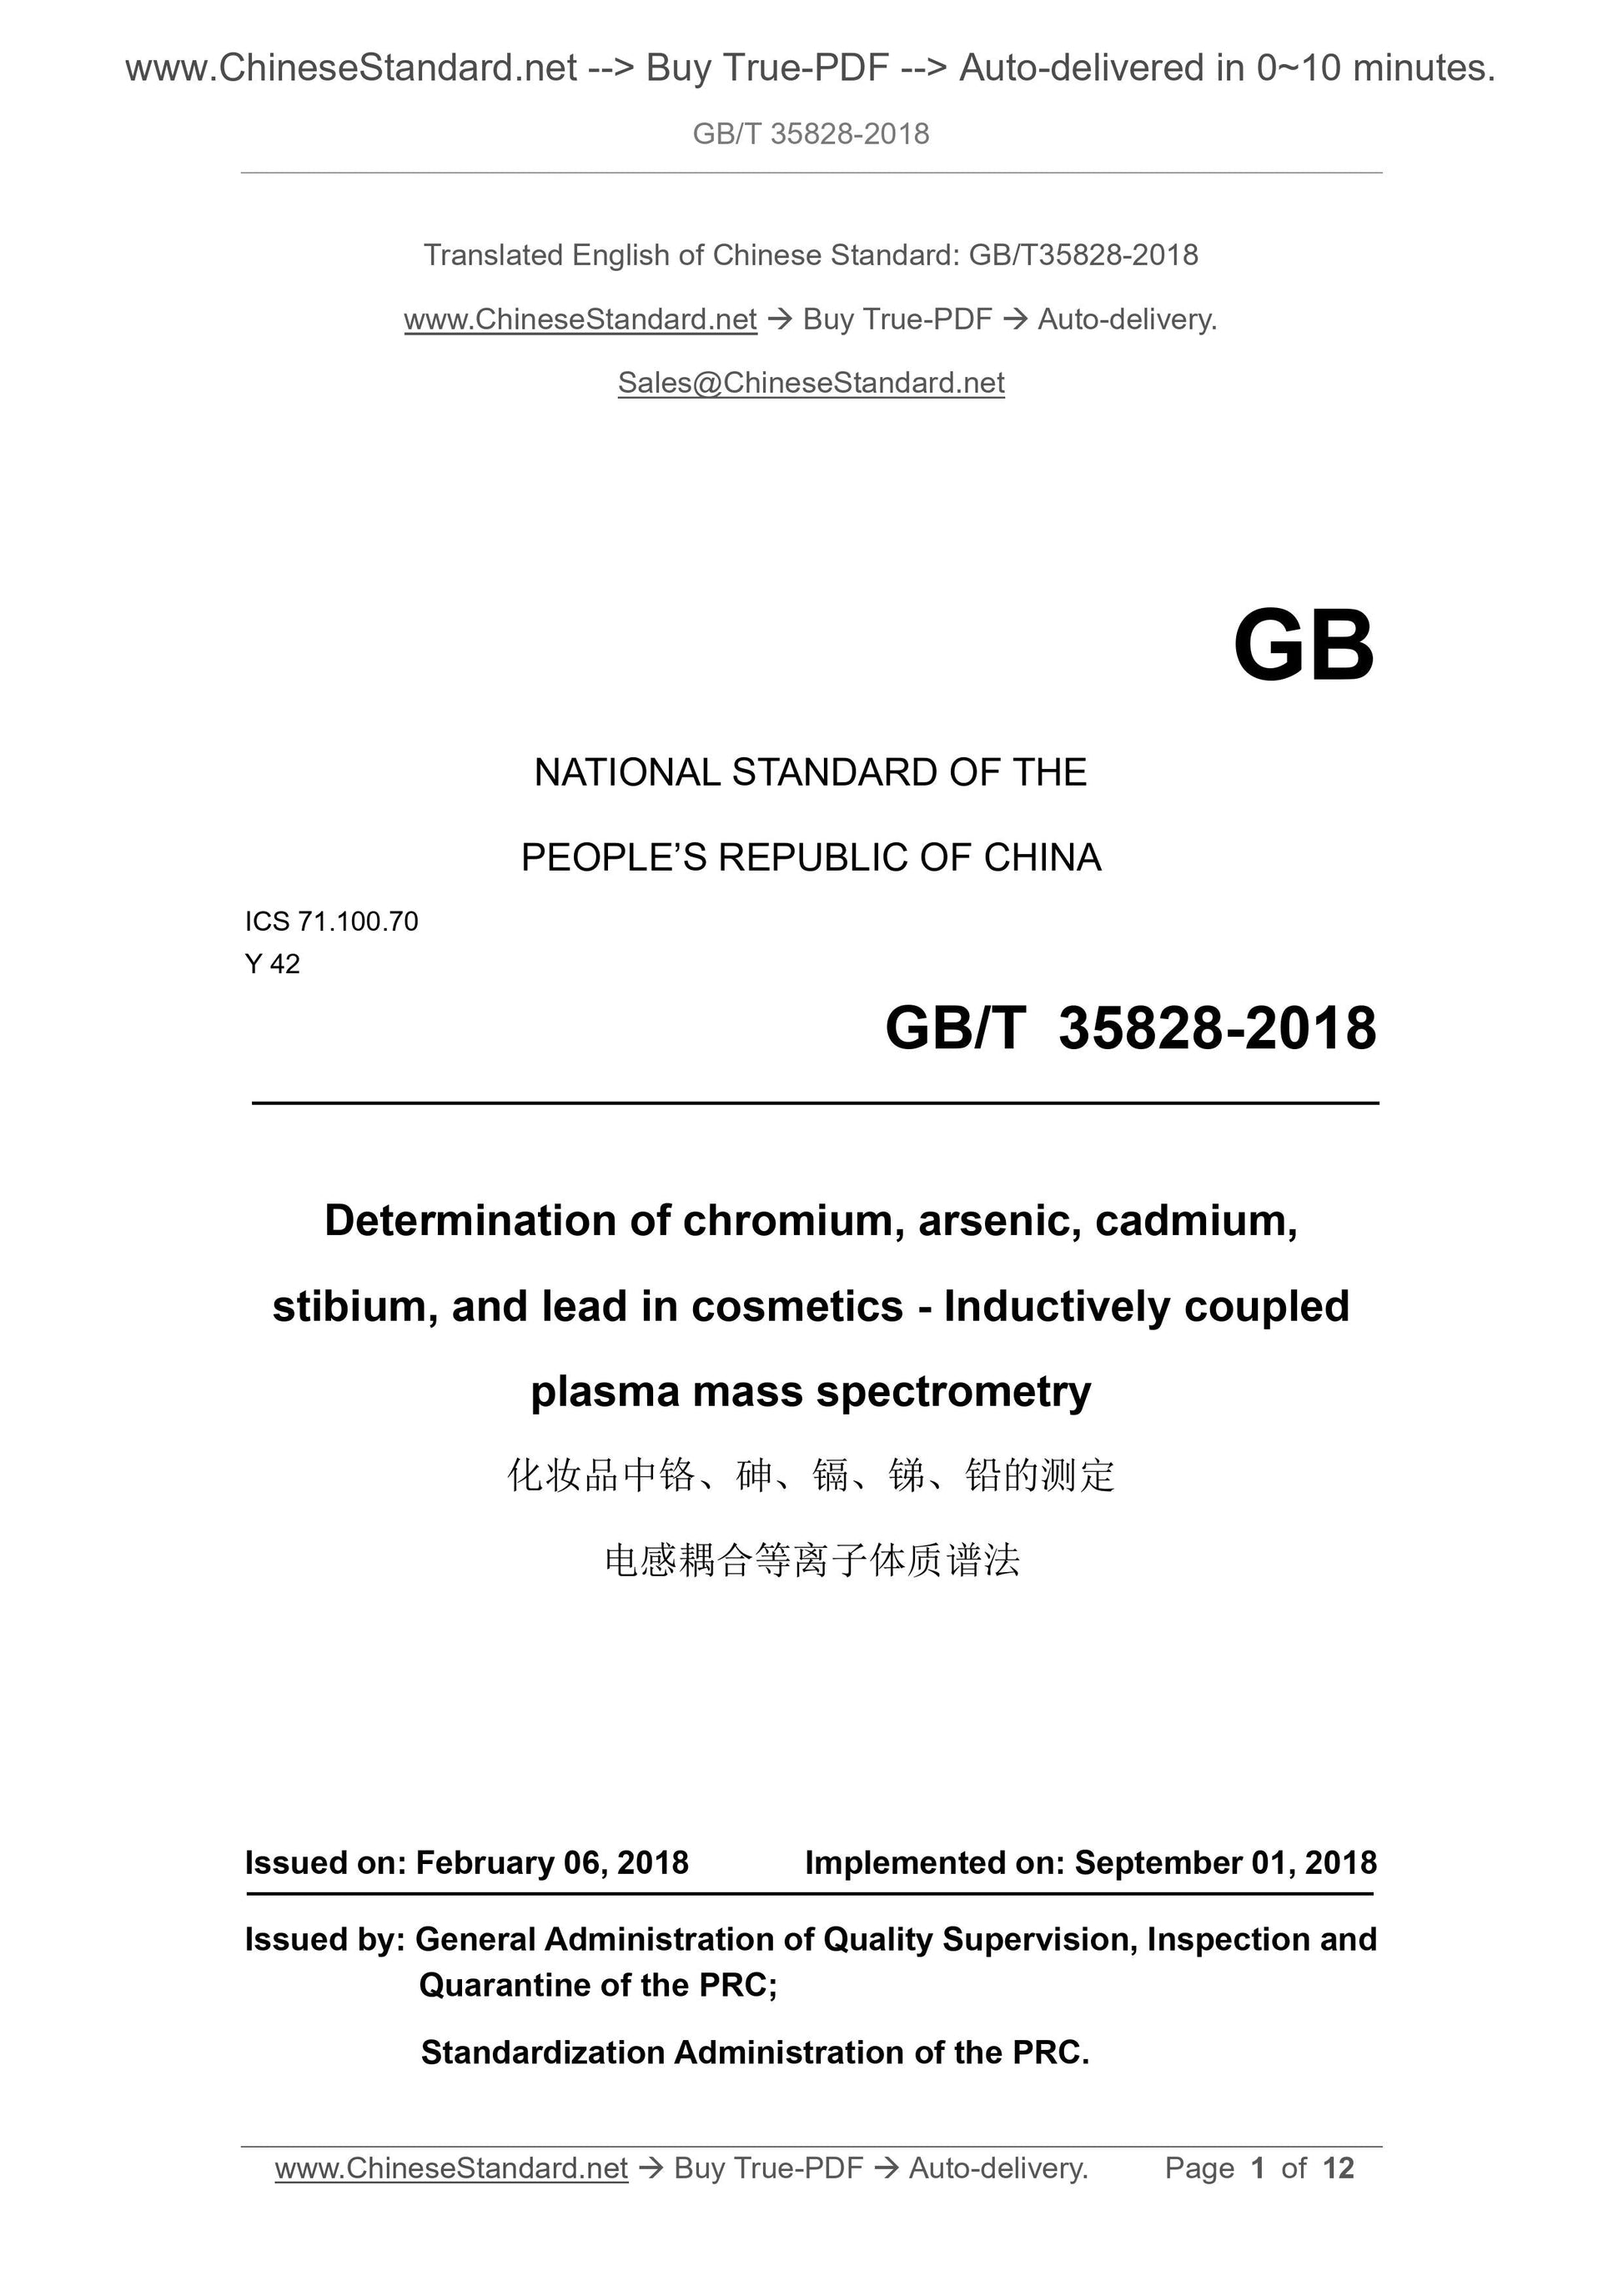 GB/T 35828-2018 Page 1